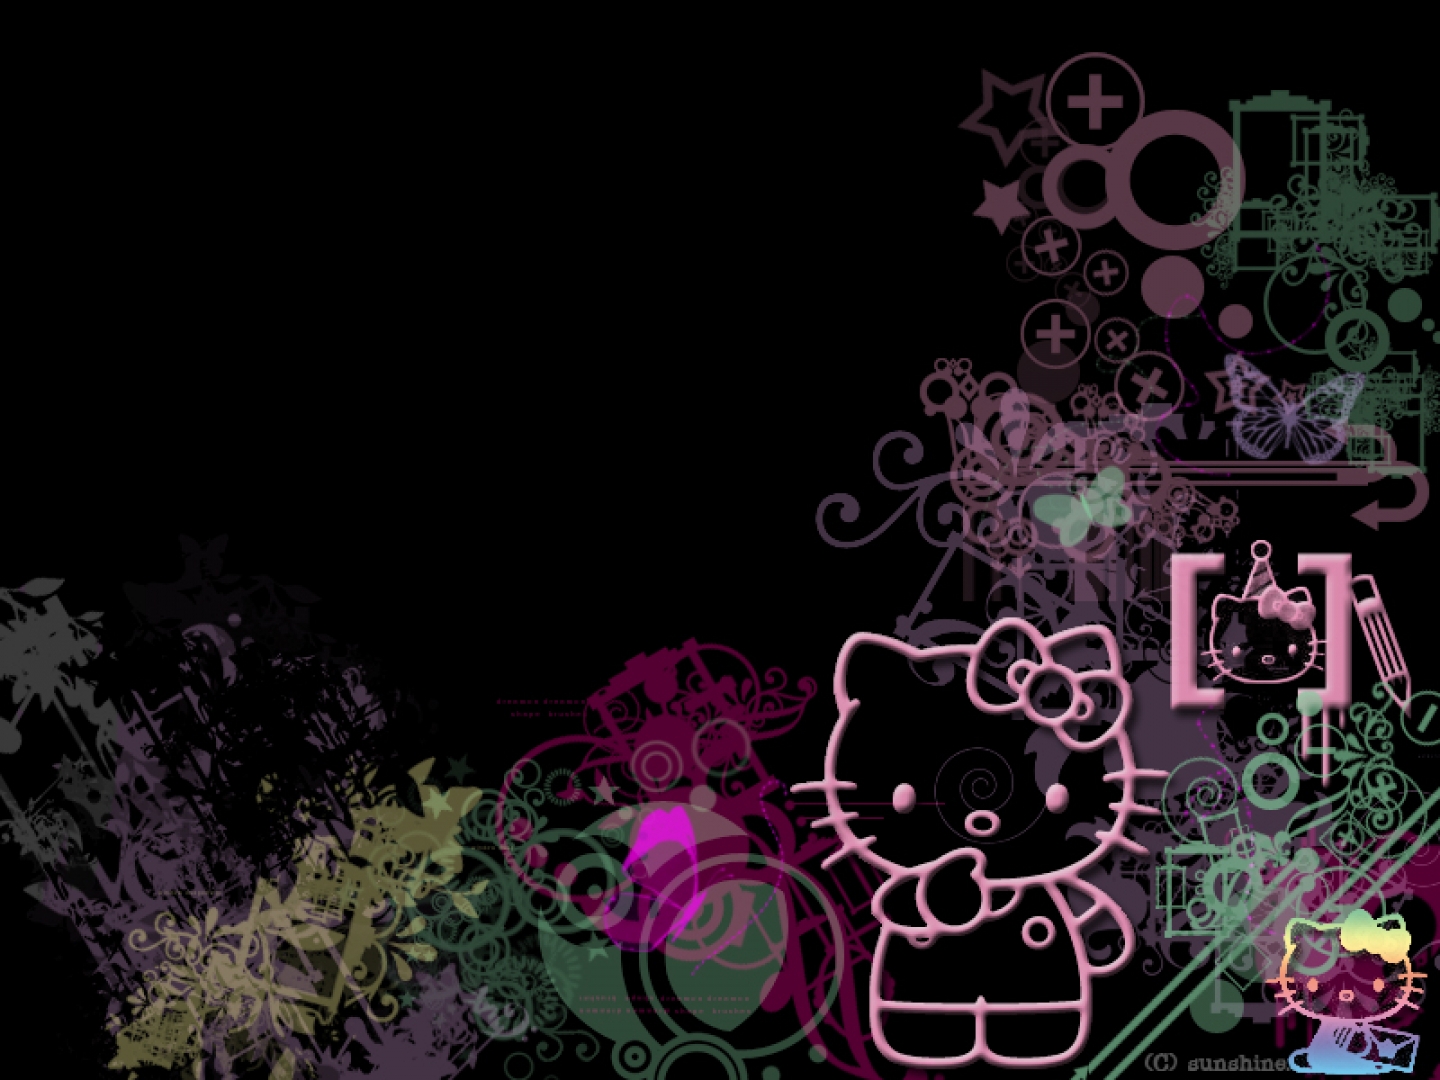 Free Download Hello Kitty Screensavers And Wallpapers 1440x1080 For Your Desktop Mobile Tablet Explore 75 Free Hello Kitty Wallpapers And Screensavers Hello Kitty Pictures Wallpaper Hello Kitty Screensavers Wallpapers